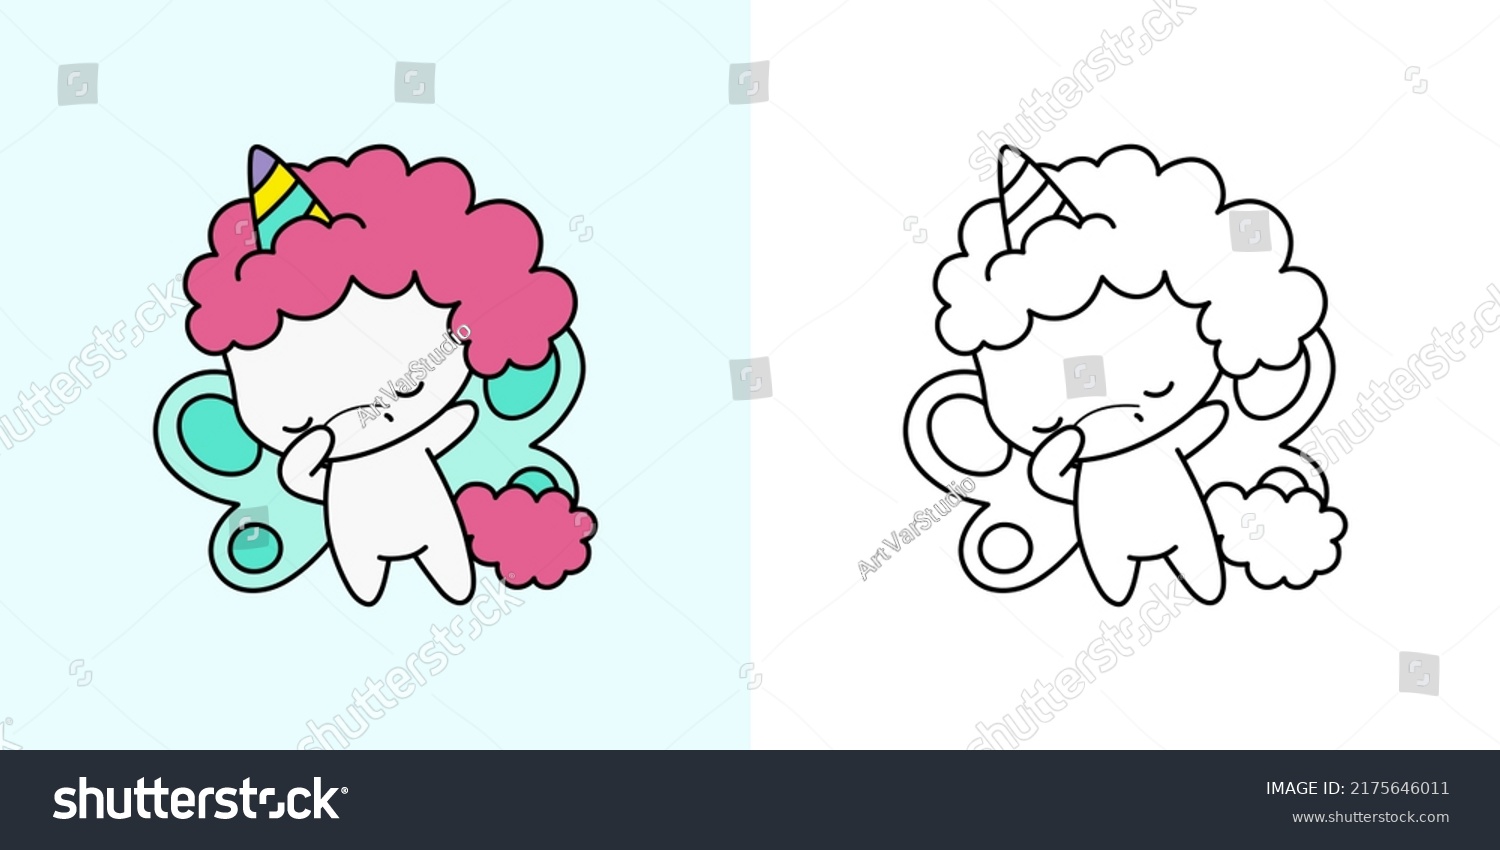 SVG of Cute Unicorn Clipart for Coloring Page and Illustration. Happy Clip Art Unicorn. Vector Illustration of a Kawaii for Stickers, Prints for Clothes, Baby Shower, Coloring Pages.  svg